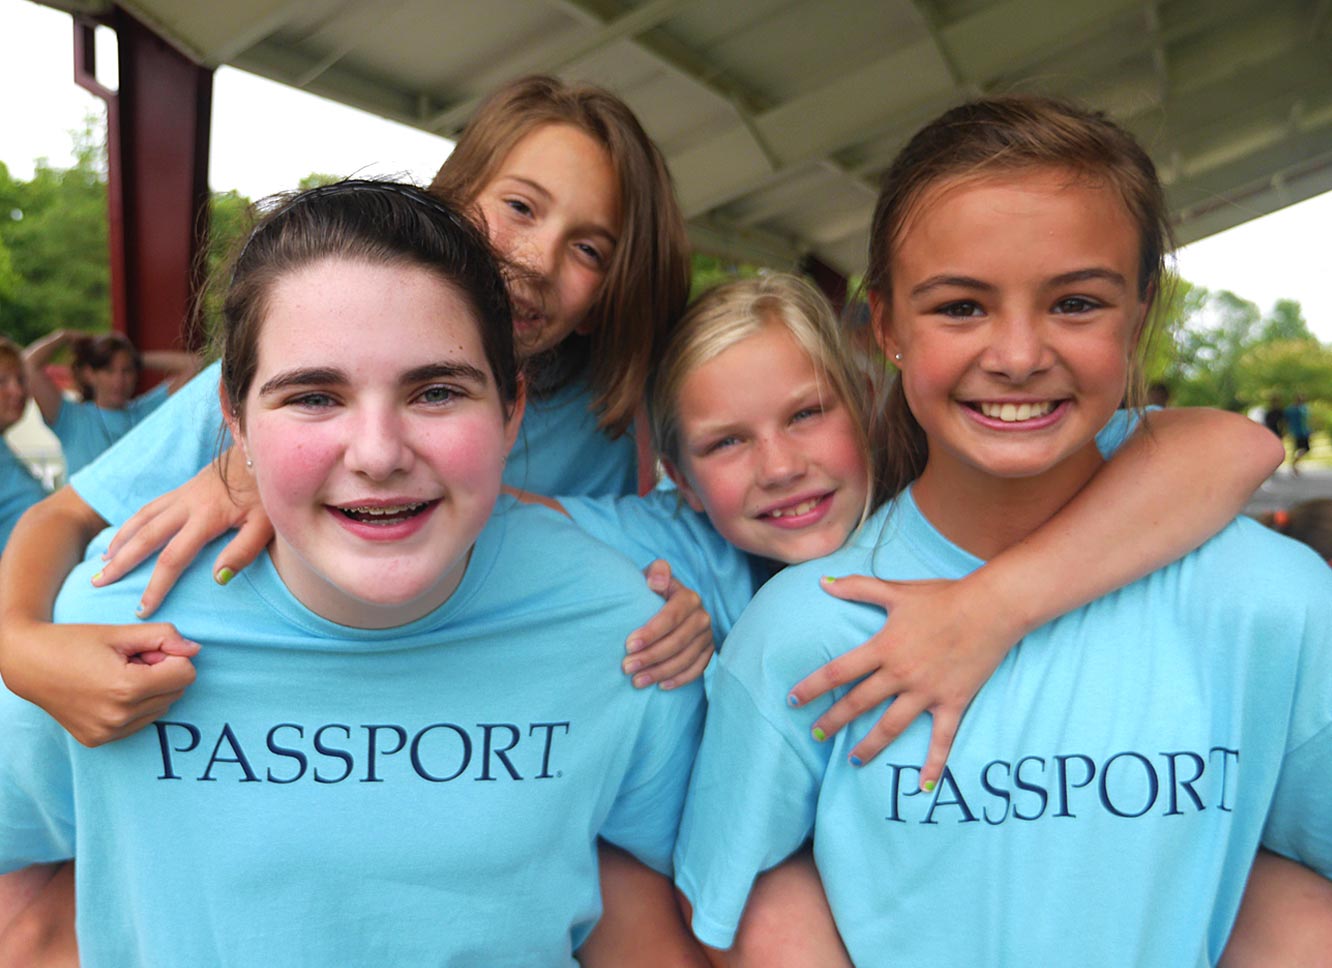 PASSPORTkids! Campers From Church Groups